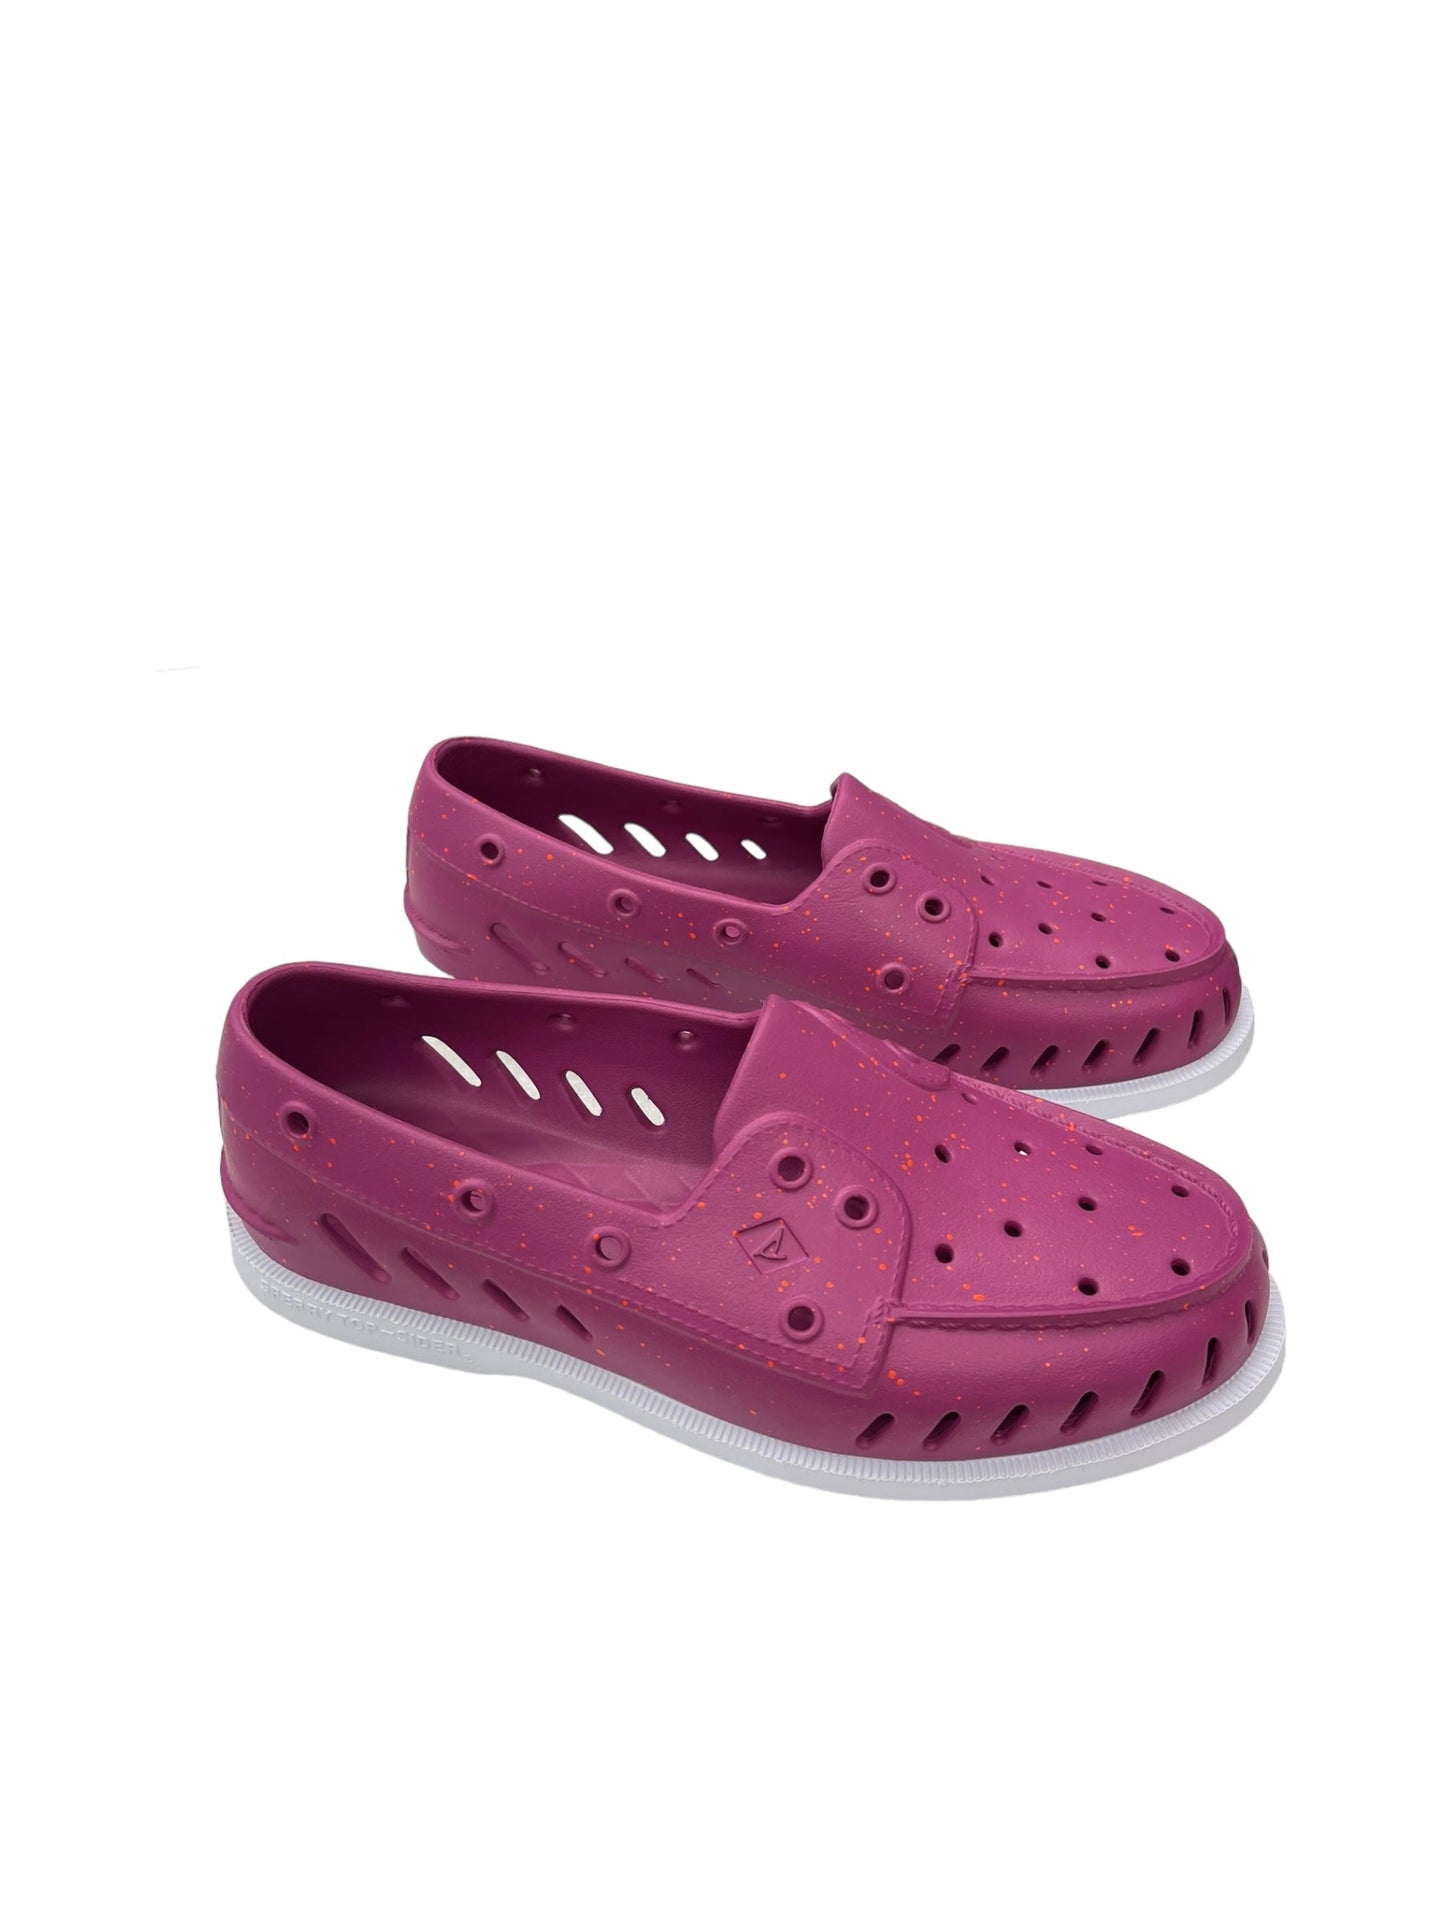 Pink Shoes Flats Sperry, Size 9